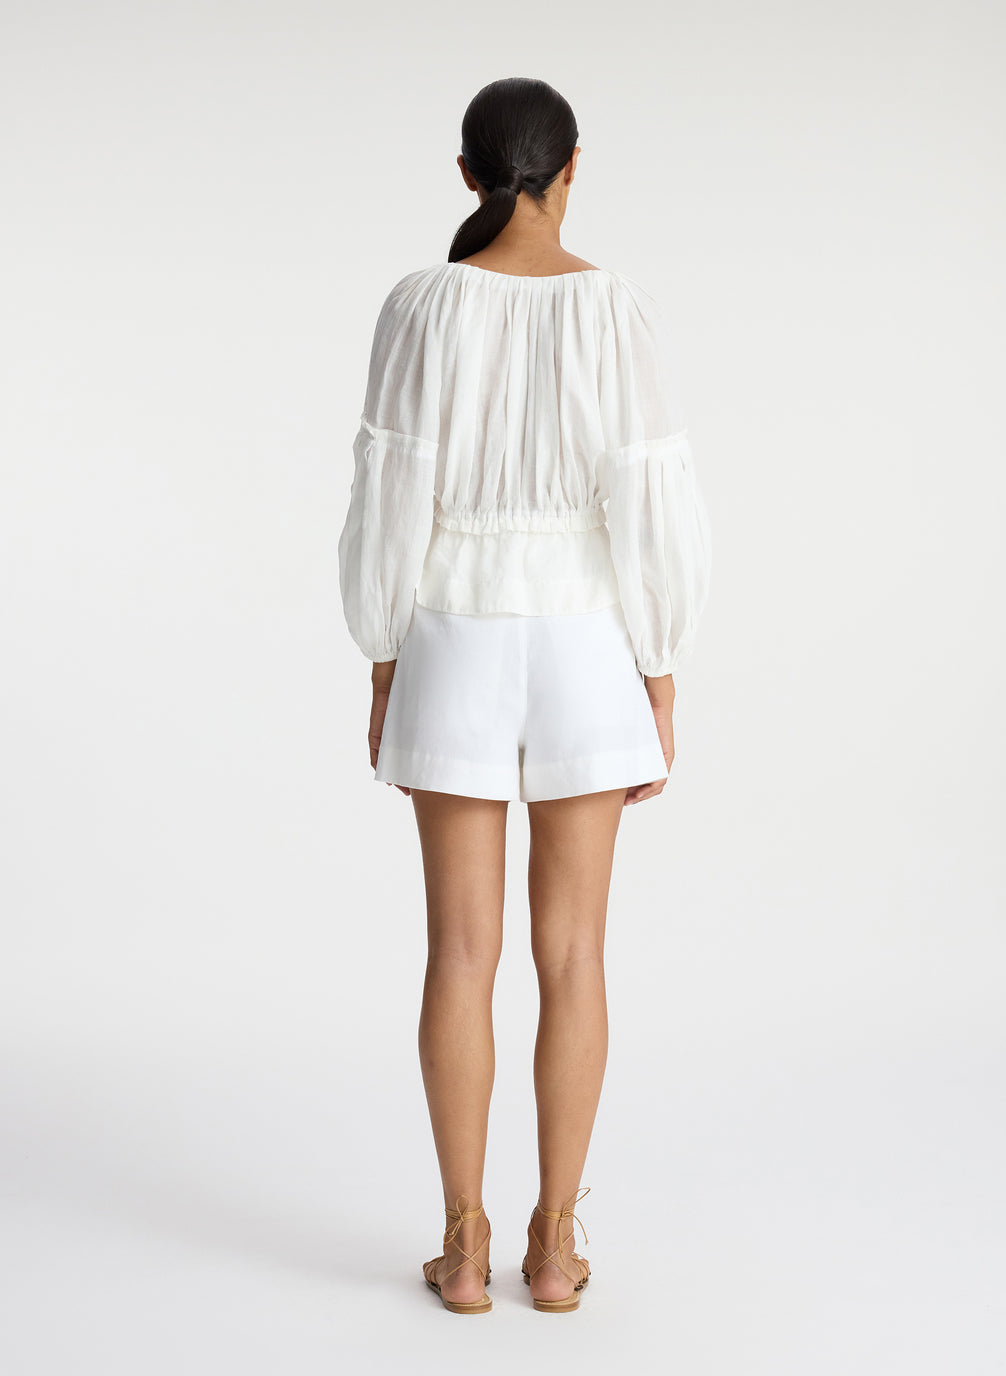 back view of woman wearing white v neck blouse with peplum and white shorts